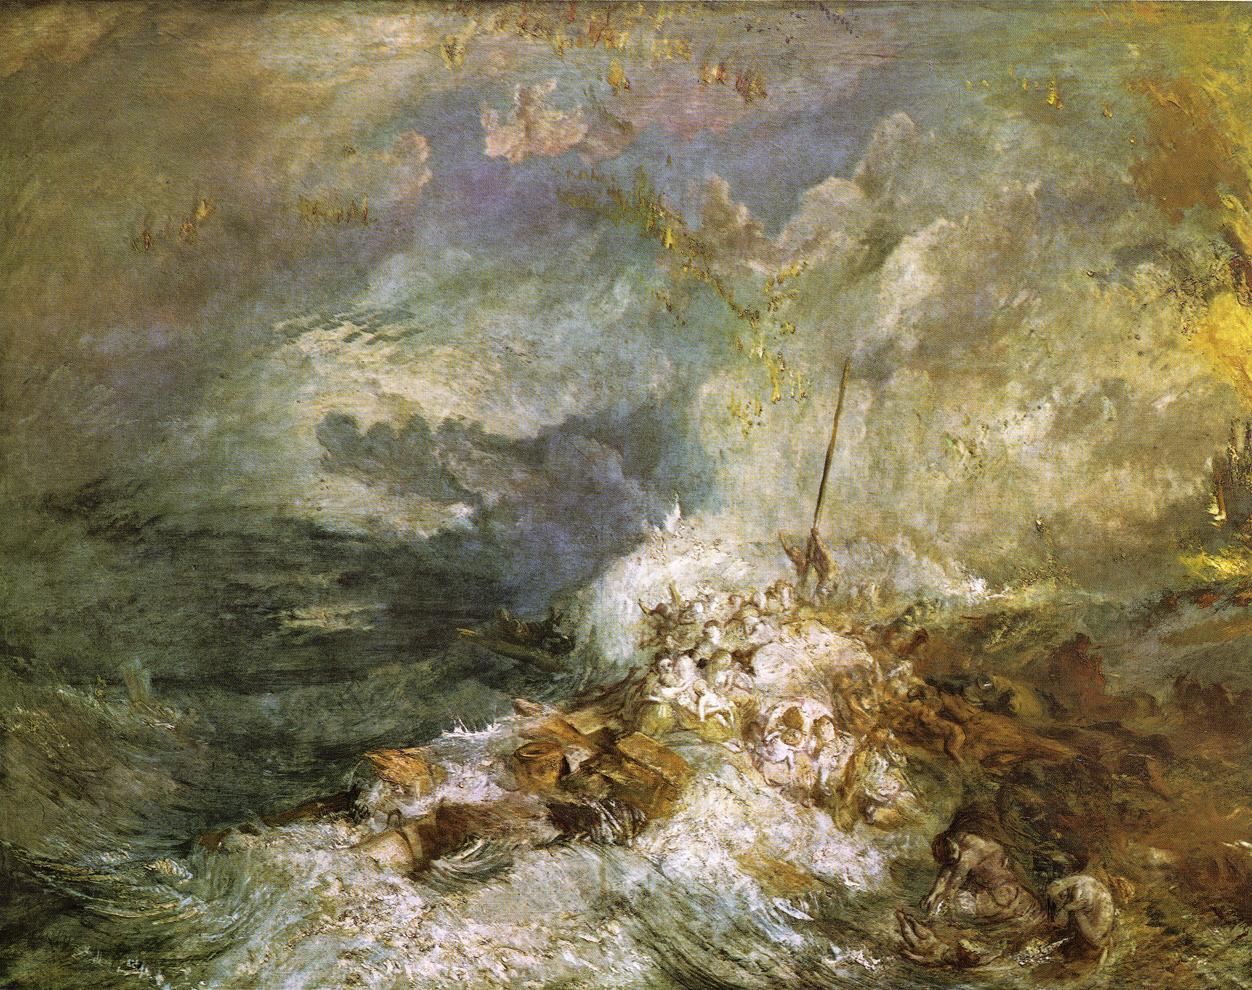 Fire at Sea (1835).